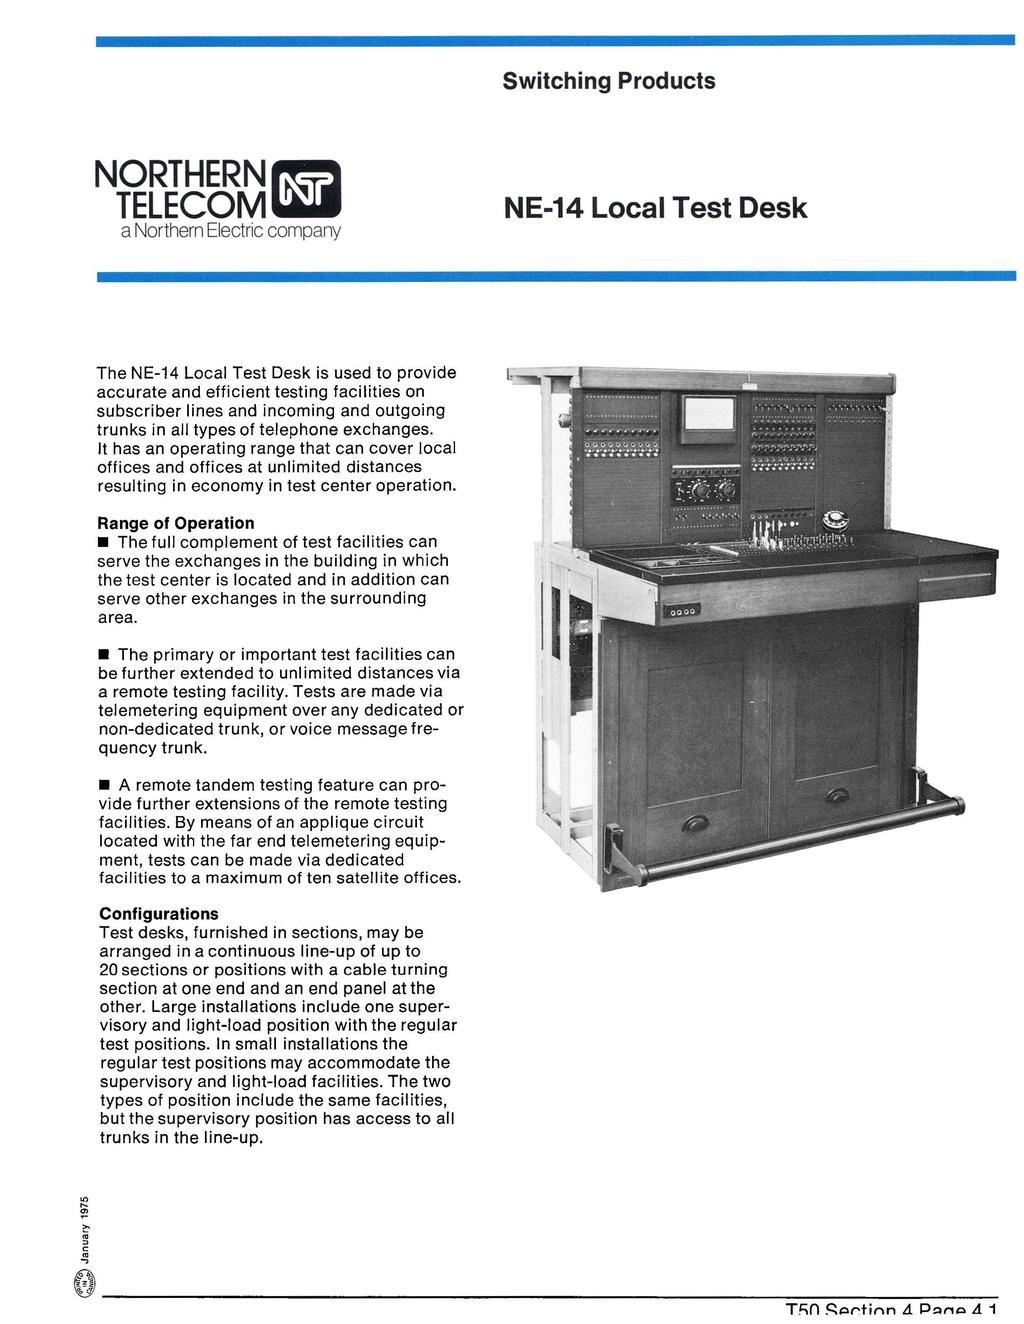 NE-14 Local Test Desk The NE-14 Local Test Desk is used to provide accurate and efficient testing facilities on subscriber lines and incoming and outgoing trunks in all types of telephone exchanges.